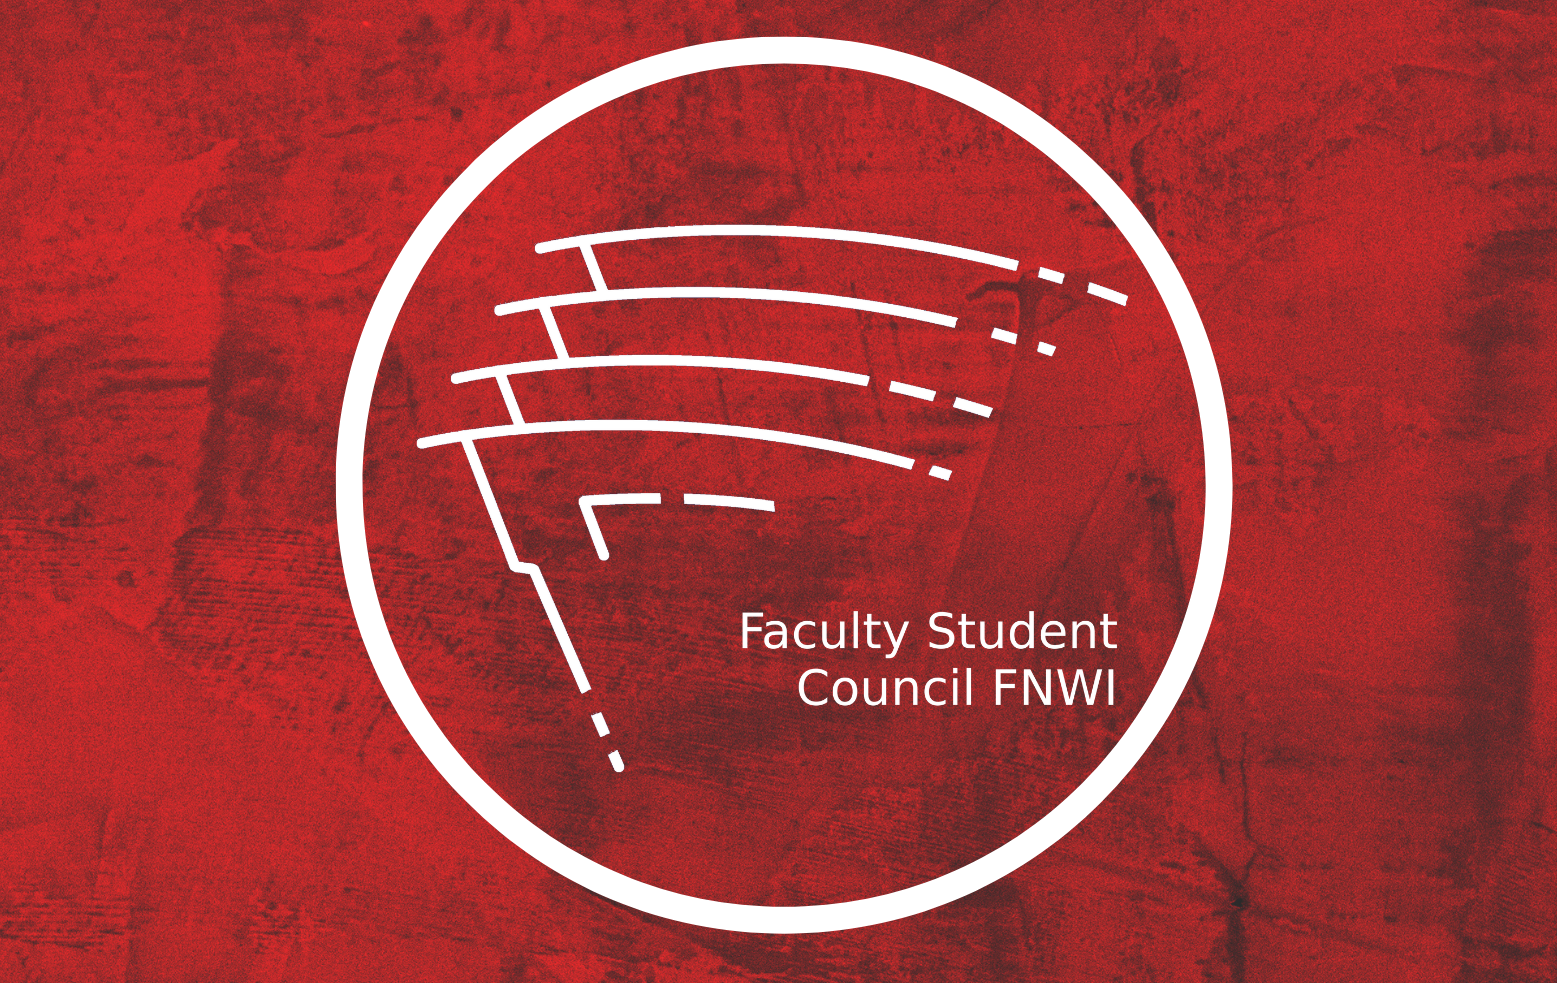 Faculty Student Council